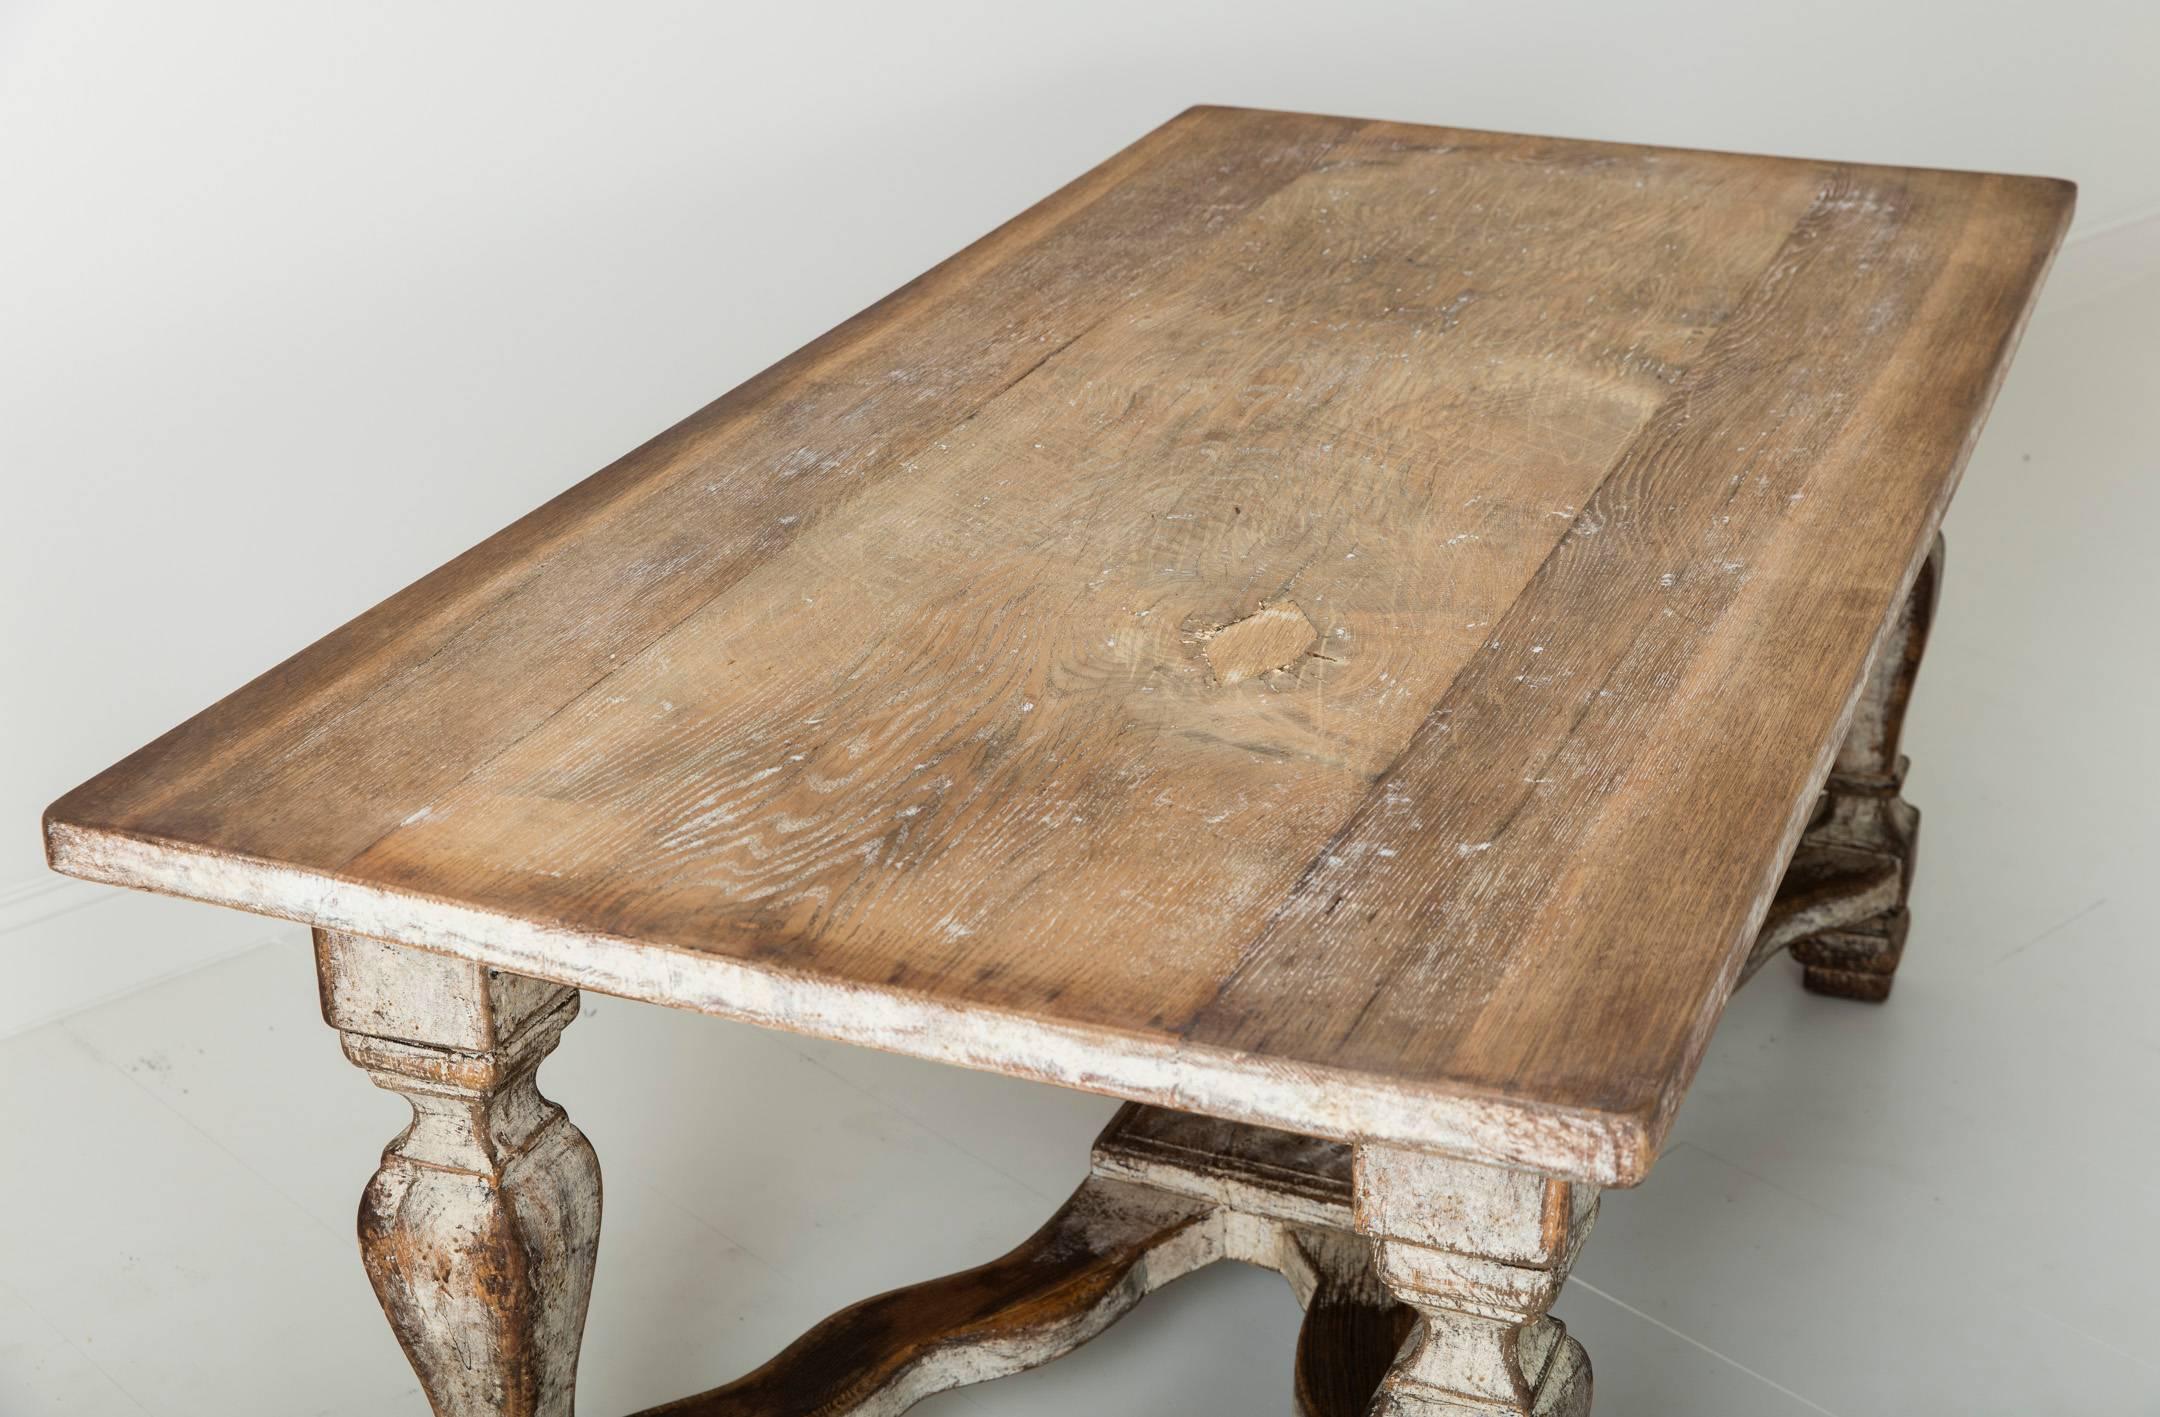 Hand-Crafted 18th Century Swedish Period Baroque Oak Library Desk or Center / Dining Table